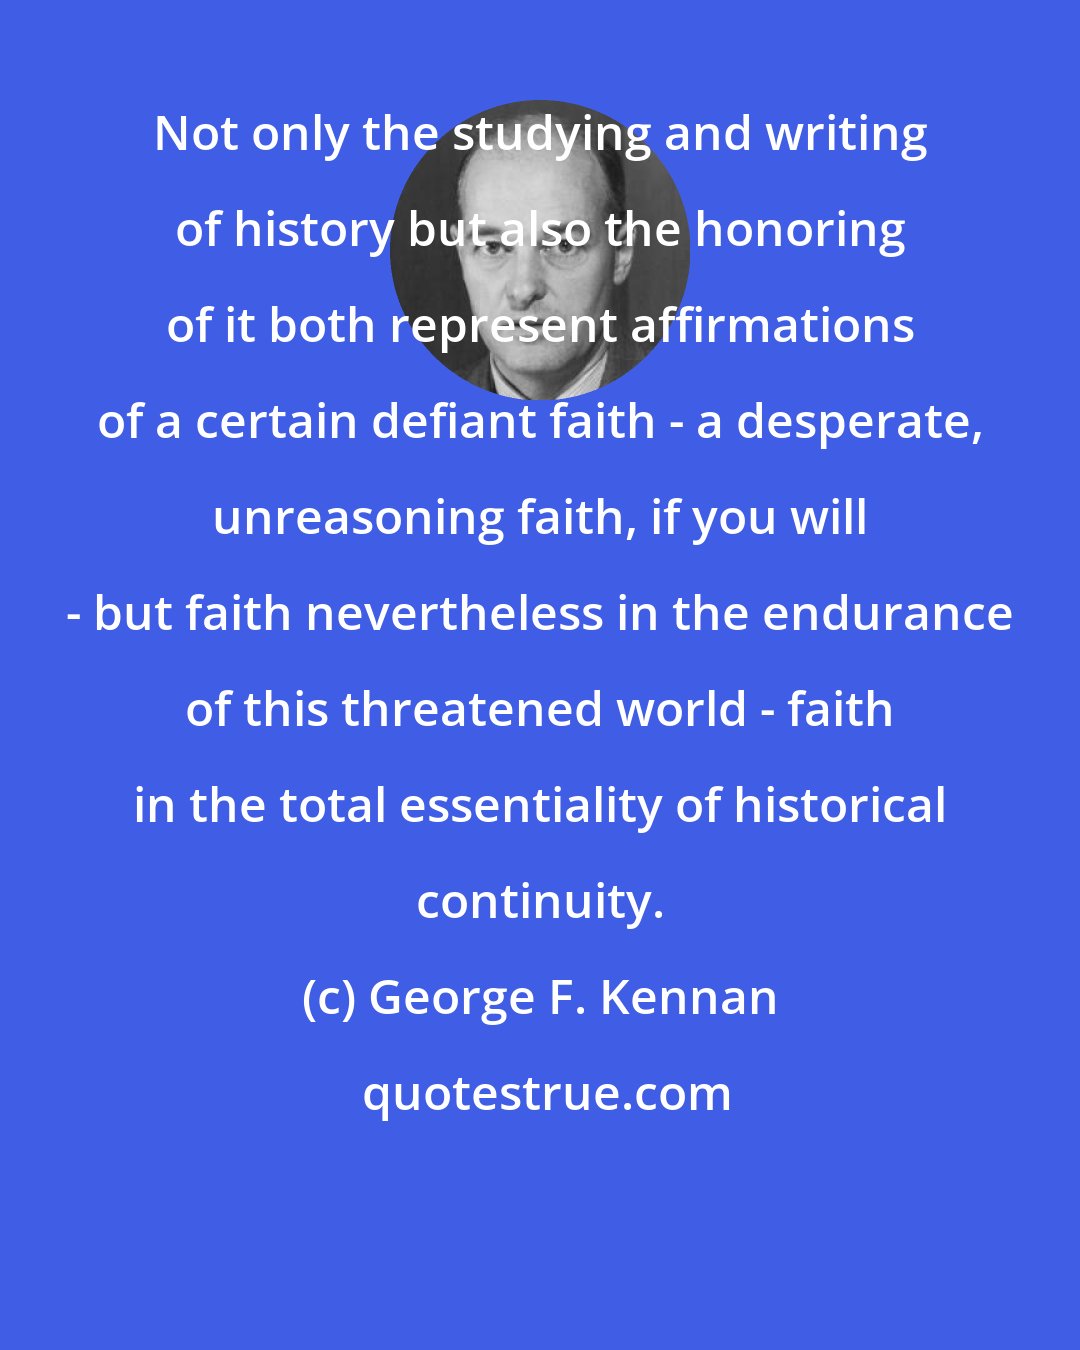 George F. Kennan: Not only the studying and writing of history but also the honoring of it both represent affirmations of a certain defiant faith - a desperate, unreasoning faith, if you will - but faith nevertheless in the endurance of this threatened world - faith in the total essentiality of historical continuity.